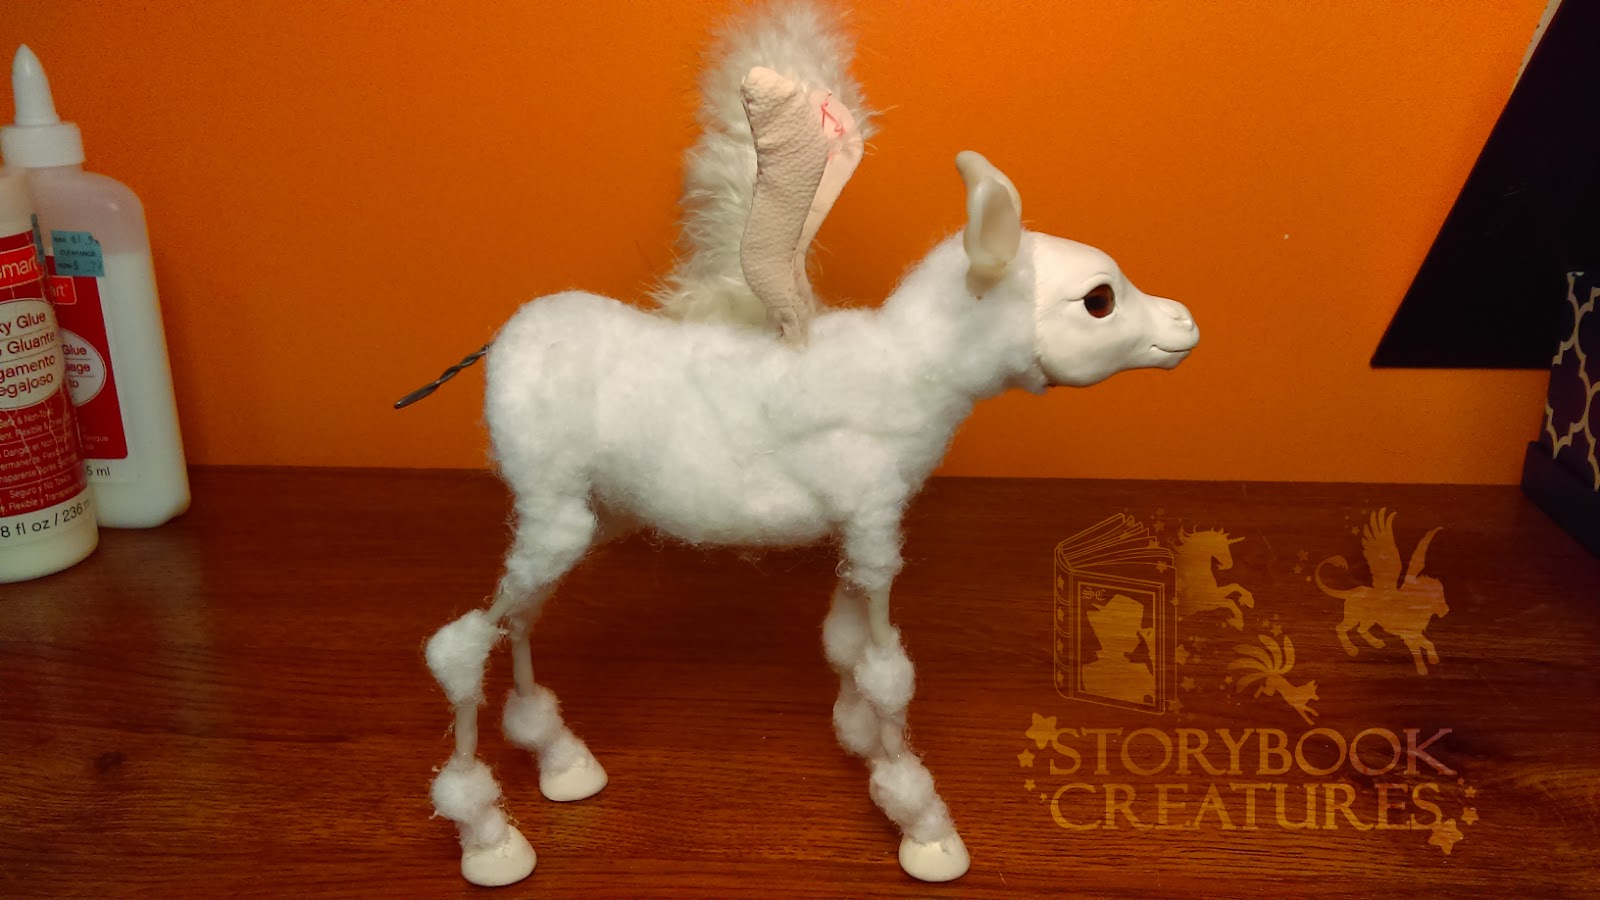 3. Armature by StorybookCreatures on DeviantArt